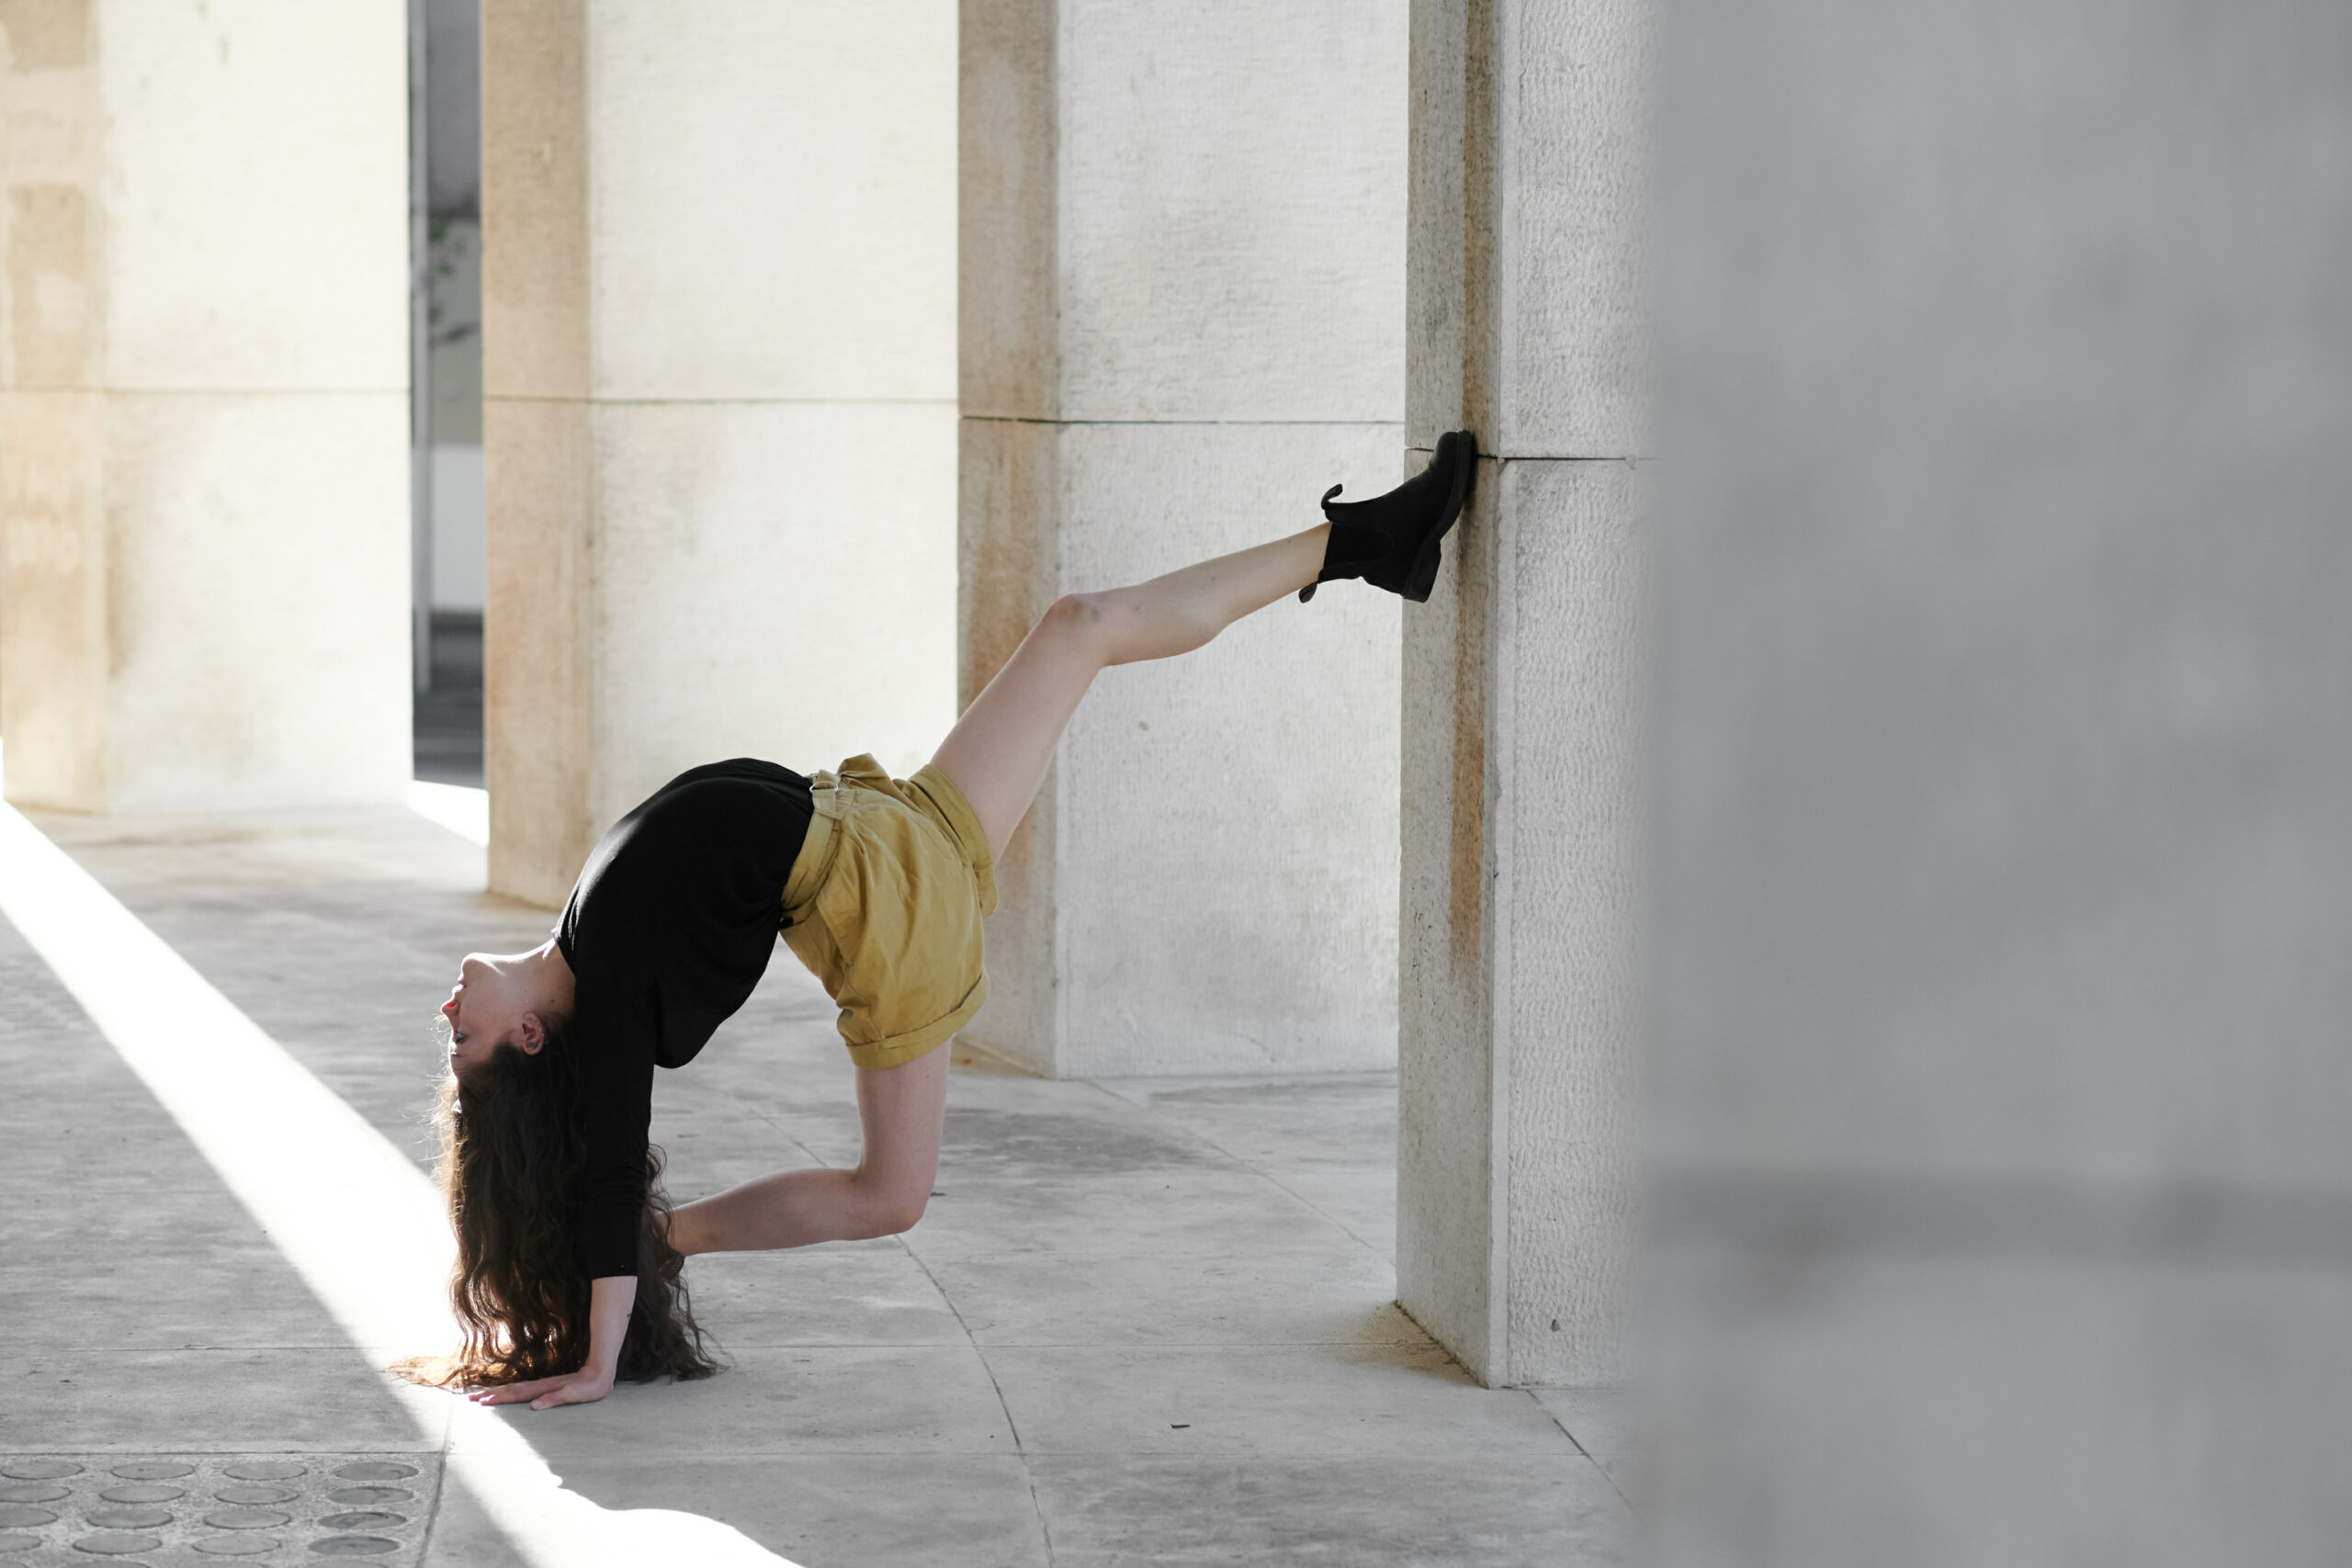 A photo of a woman outside in a paved area. She is doing a version of the splits but one of her legs is about head height on a pillar and her other on the floor, her torso is arching backwards and her head is nearly touching the floor behind her.